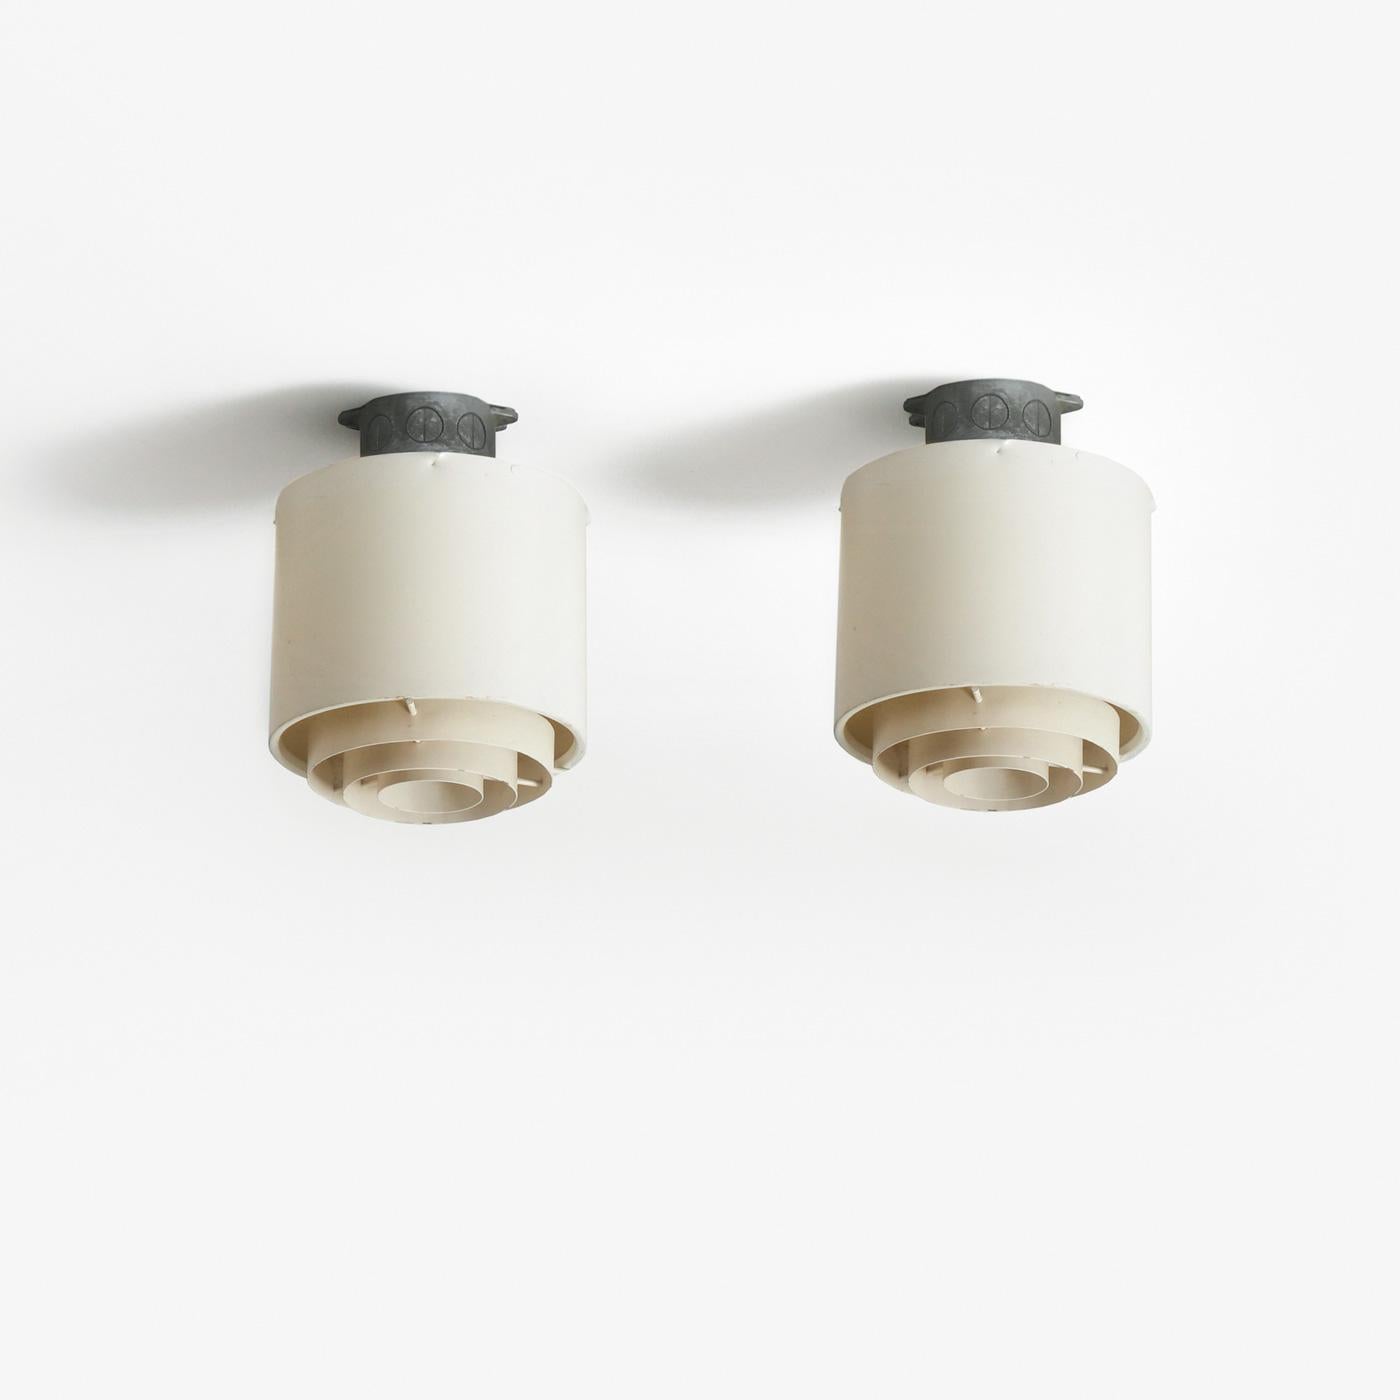 Pair of metal ceiling lamps designed by Alvar Aalto for Idman in Finland, 1950s.

The lamps feature the original manufacturer’s stamp.

Date of manufacture: 1950s
Origin: Finland
Material: Metal
Dimensions (each): H 25 cm x diameter 19 cm
Condition: